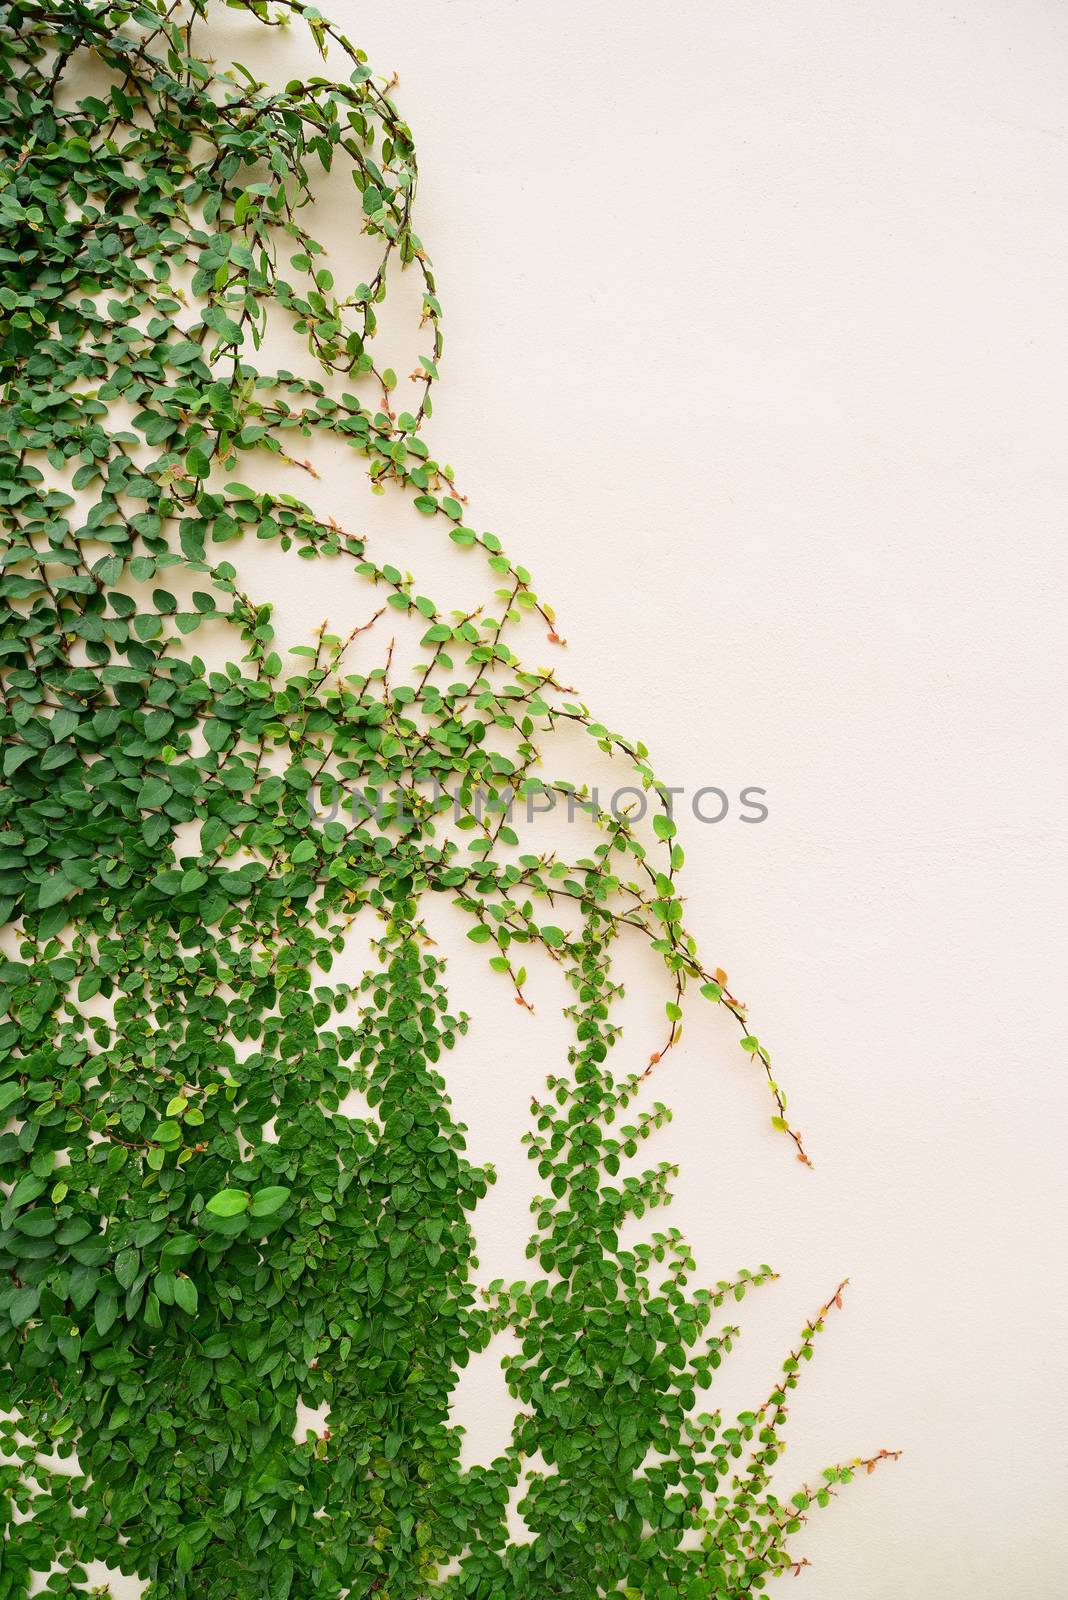 Wall of Ivy by antpkr